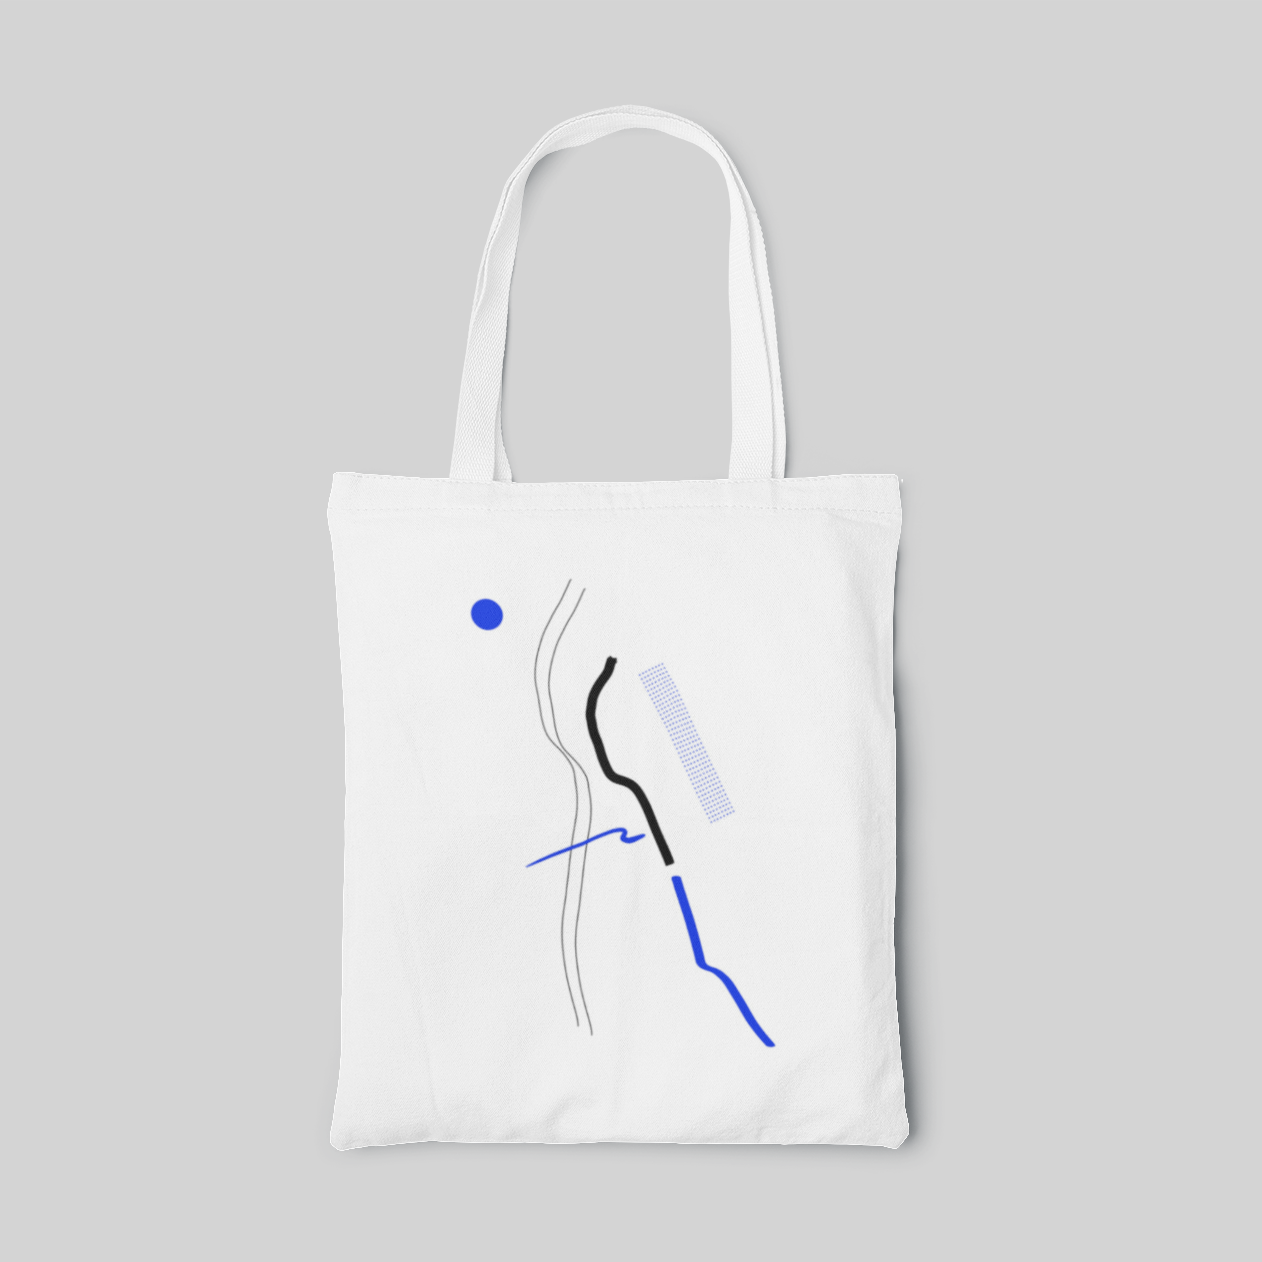 White designed tote bag with black and blue lines, front side